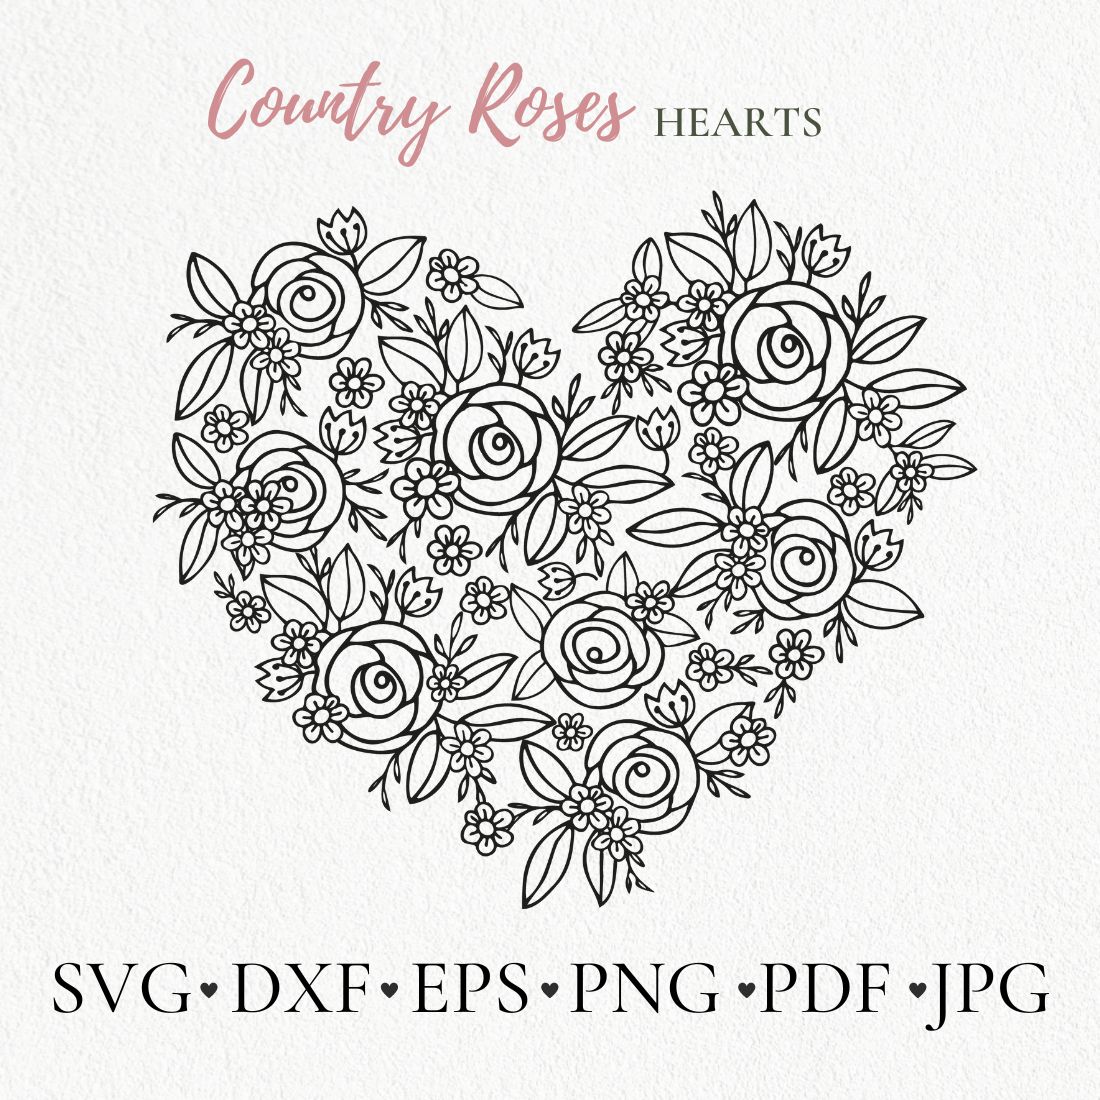 Hearts with doodle rose flower forget me not svg, preview image.